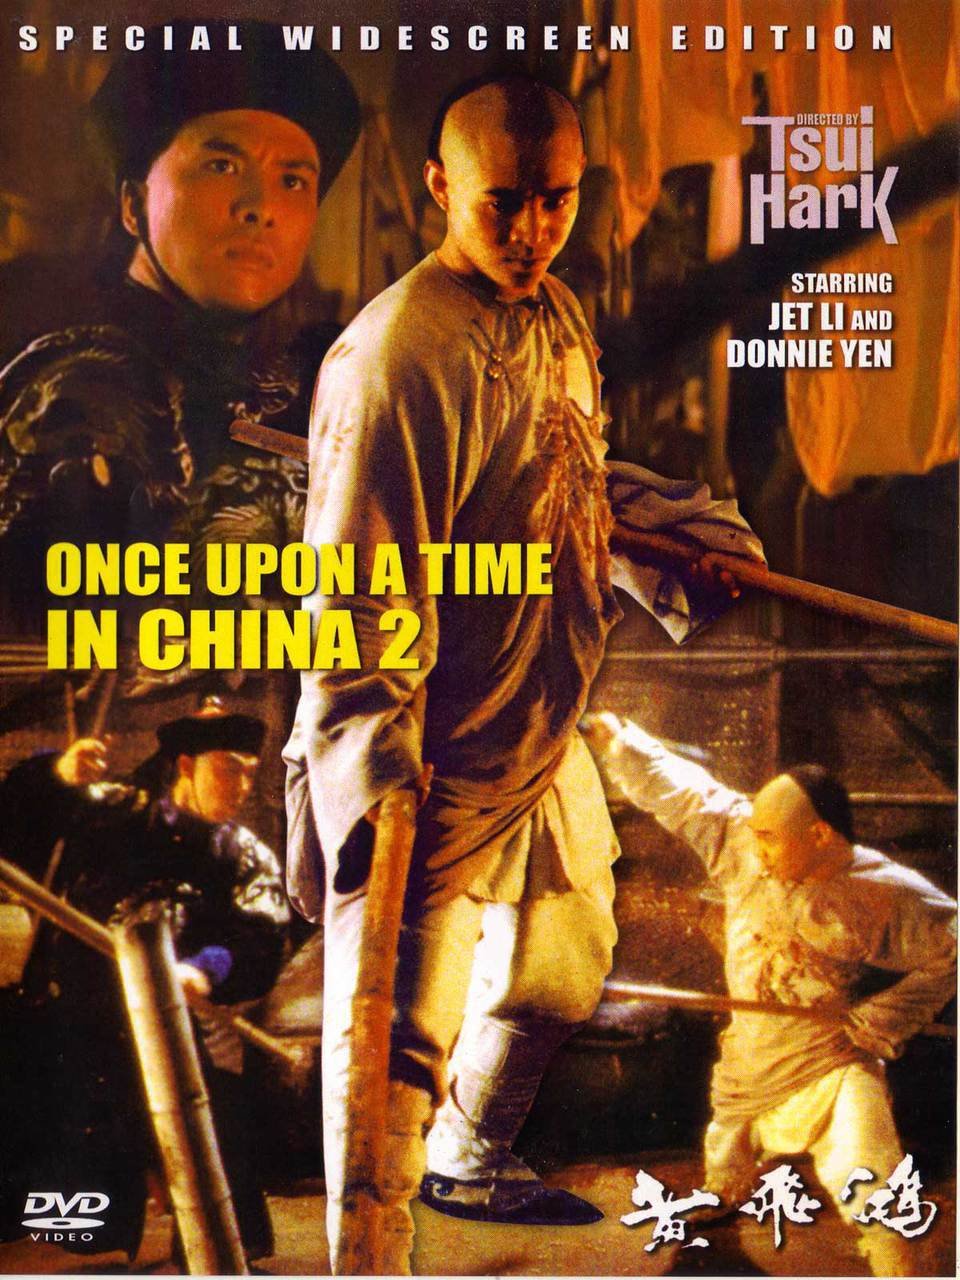 VD7720A KF-192  Once Upon A Time in China #2 DVD